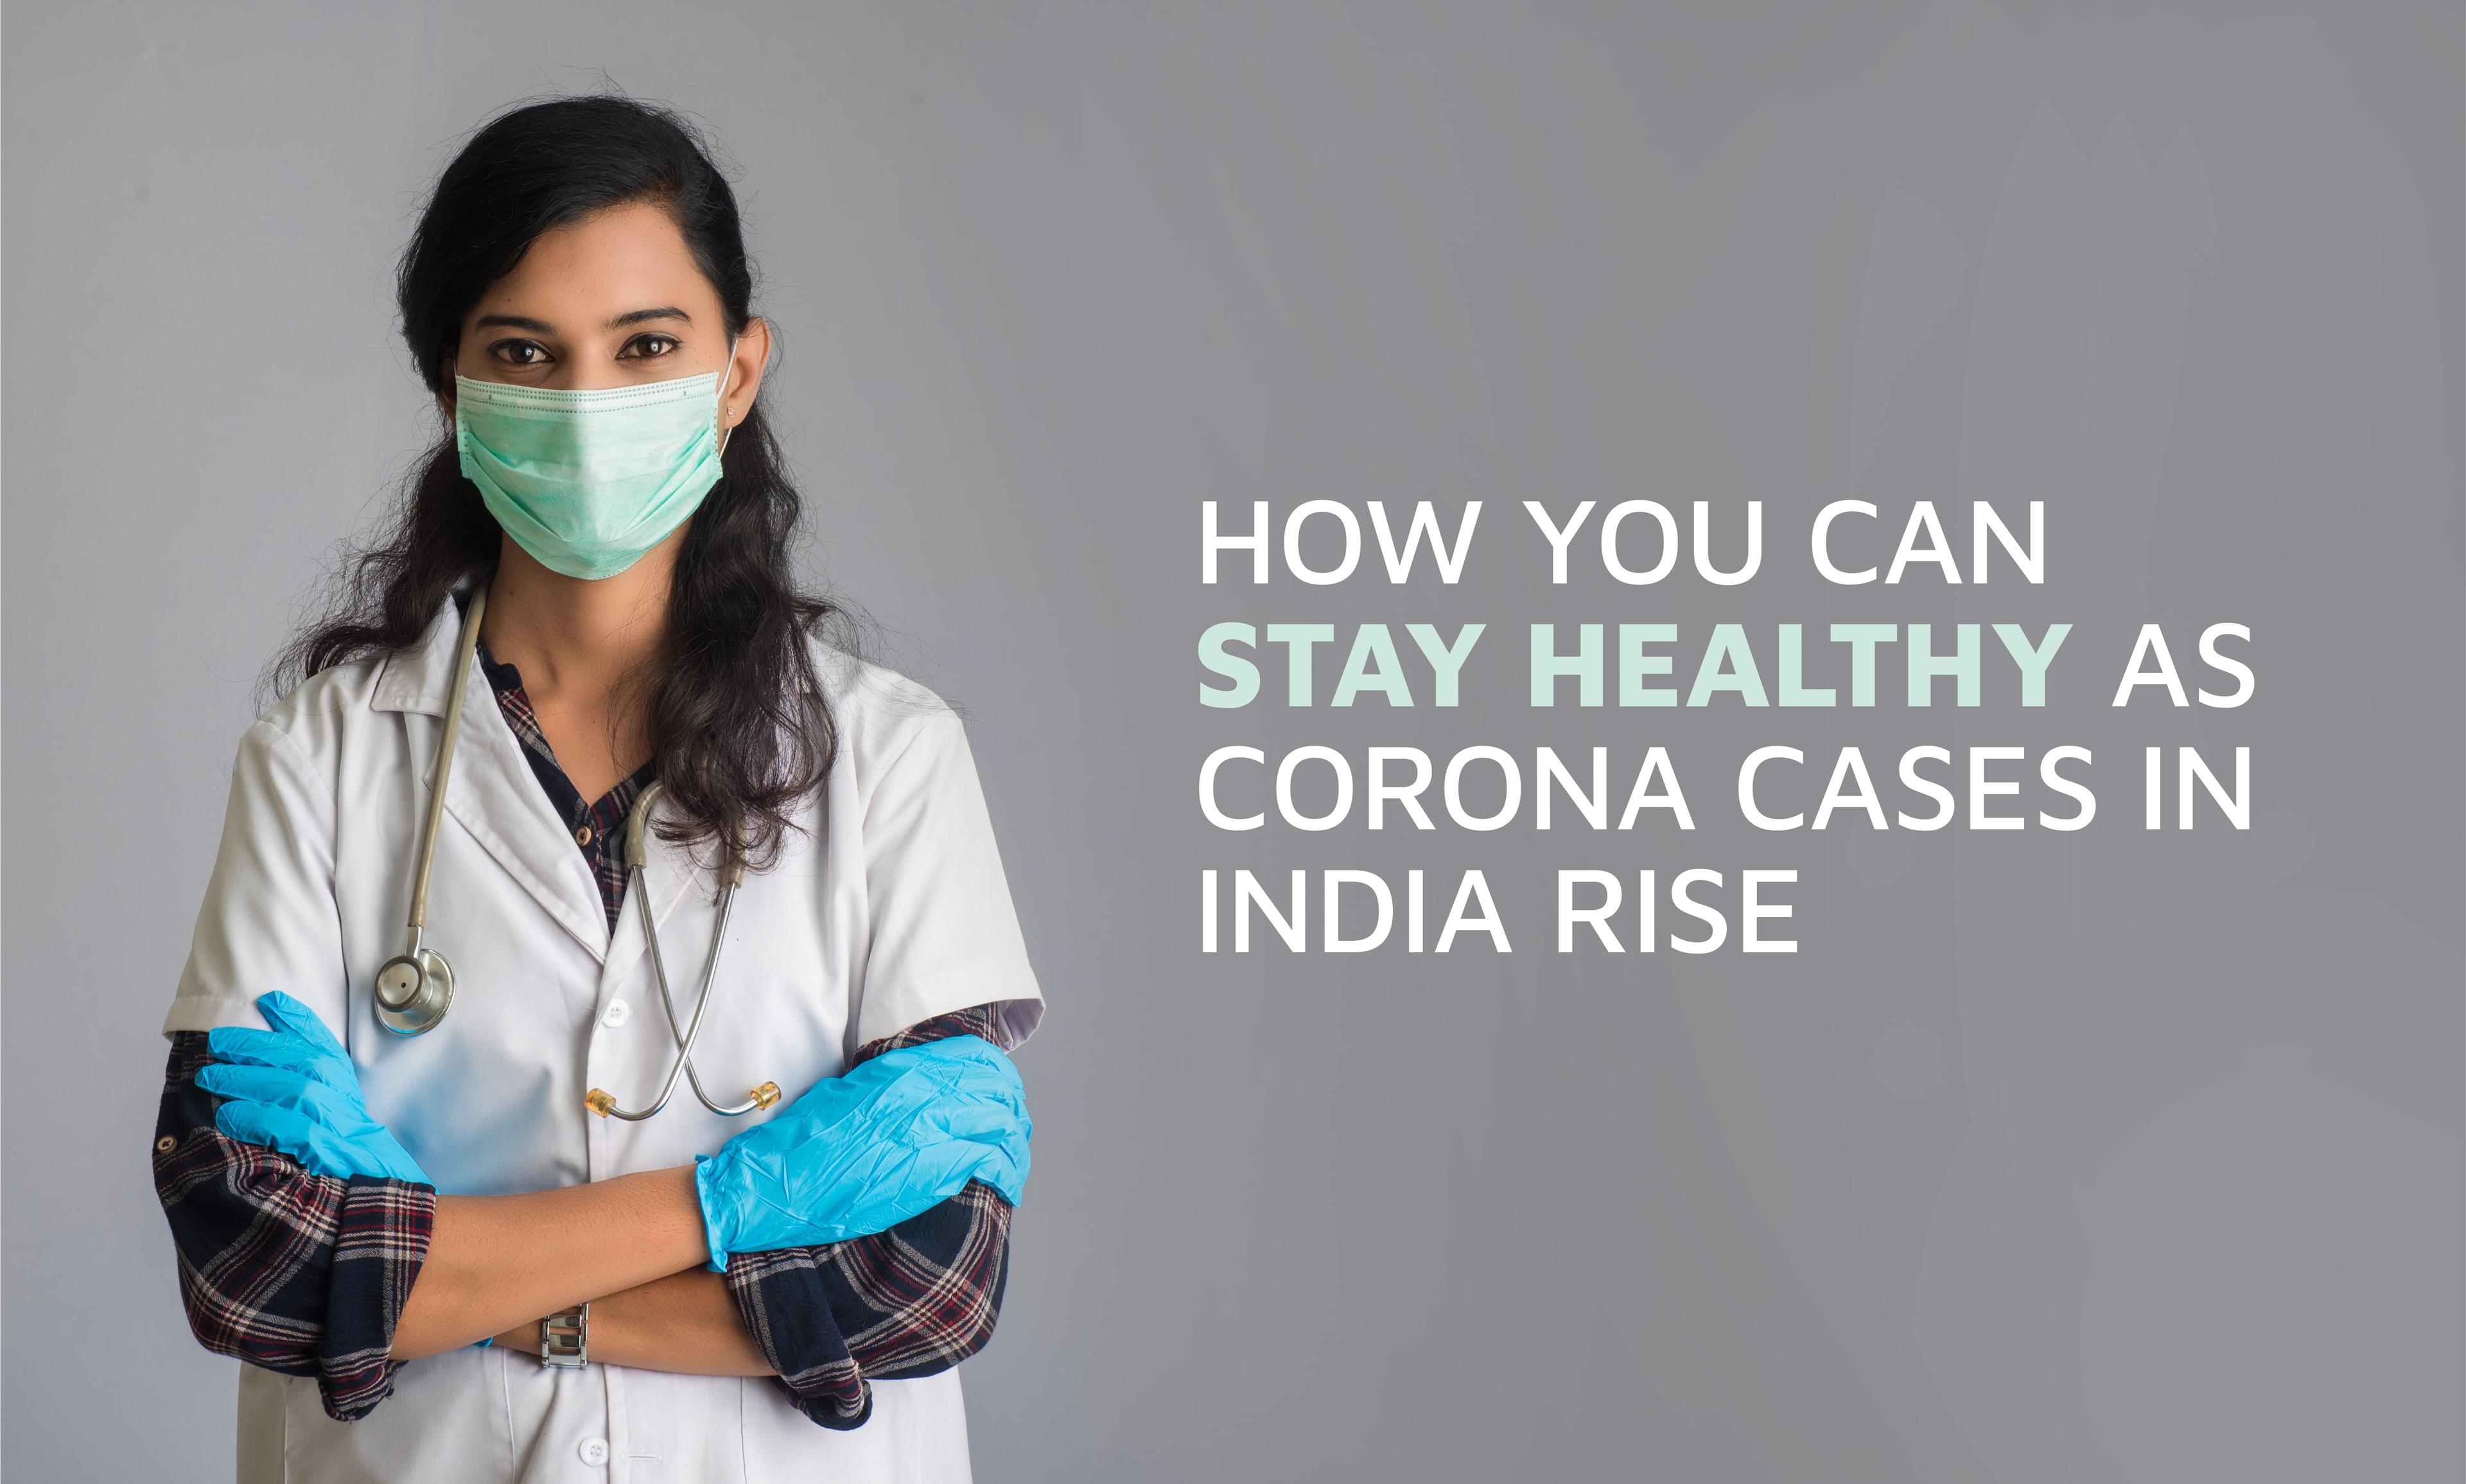 A Doctor’s View On How You Can Stay Healthy As Corona Cases In India Rise